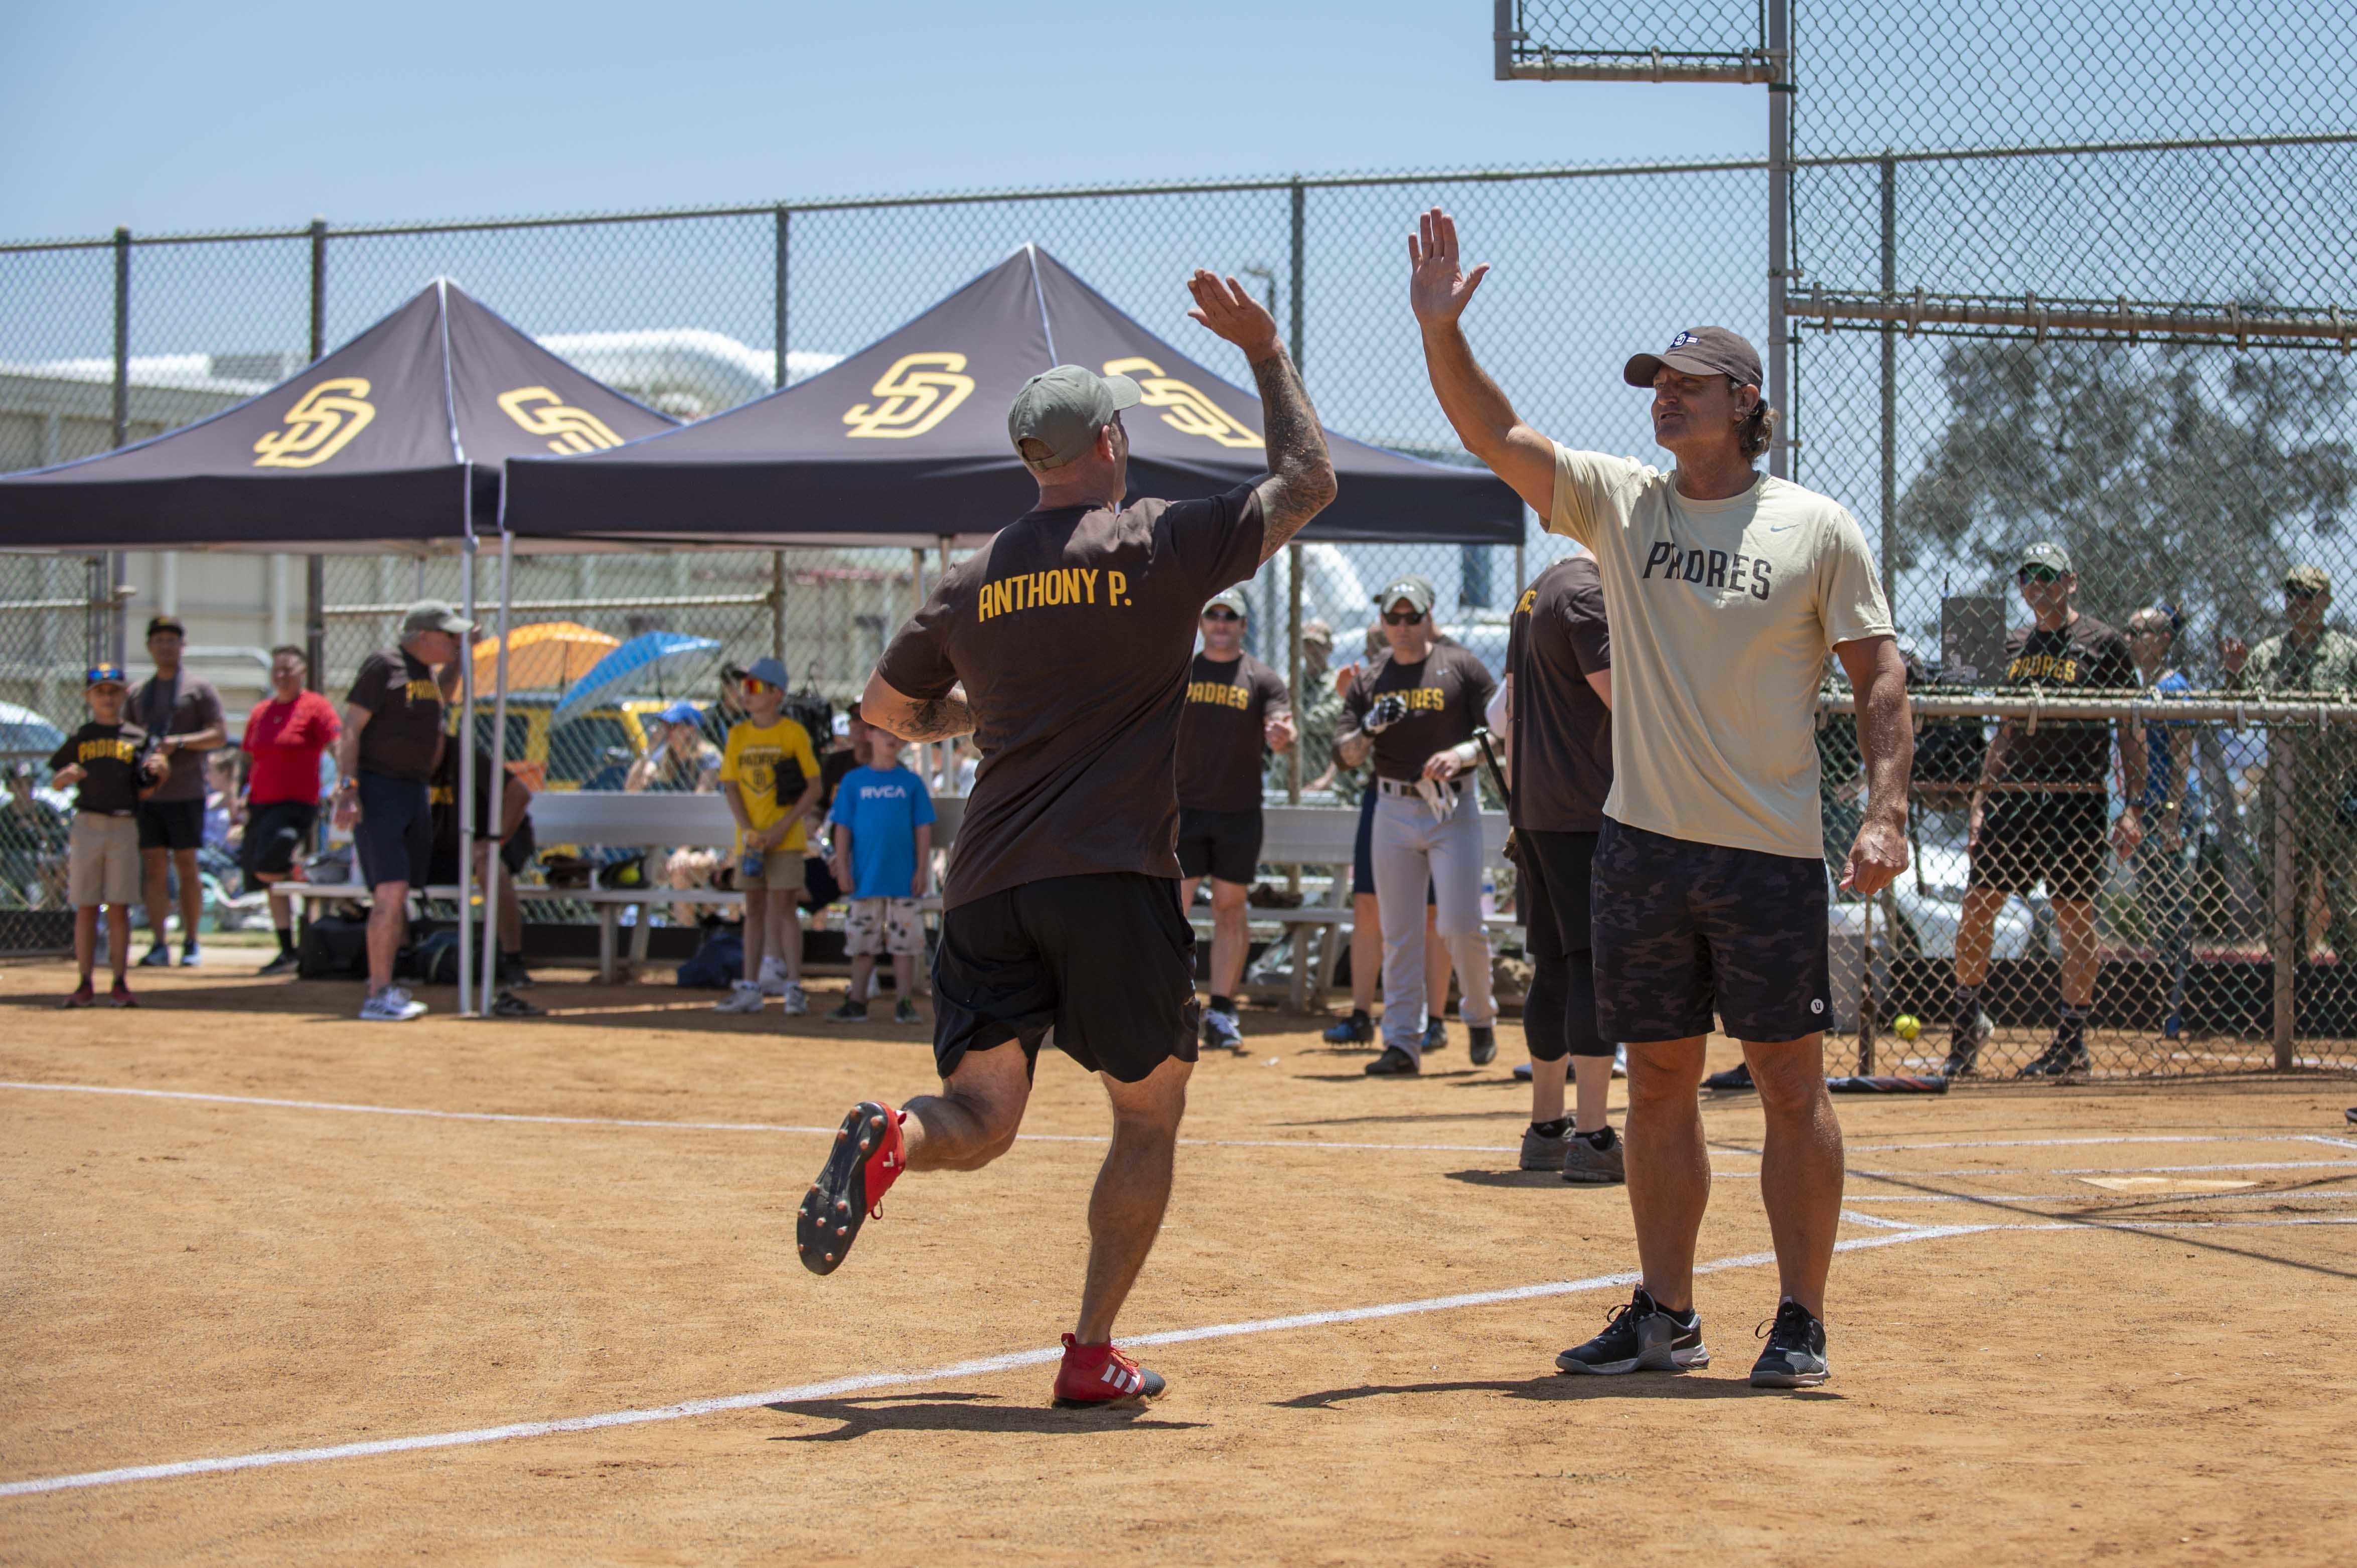 Sailors assigned to Naval Special Warfare units play a softball game against former San Diego Padres baseball players at Naval Amphibious Base Coronado.